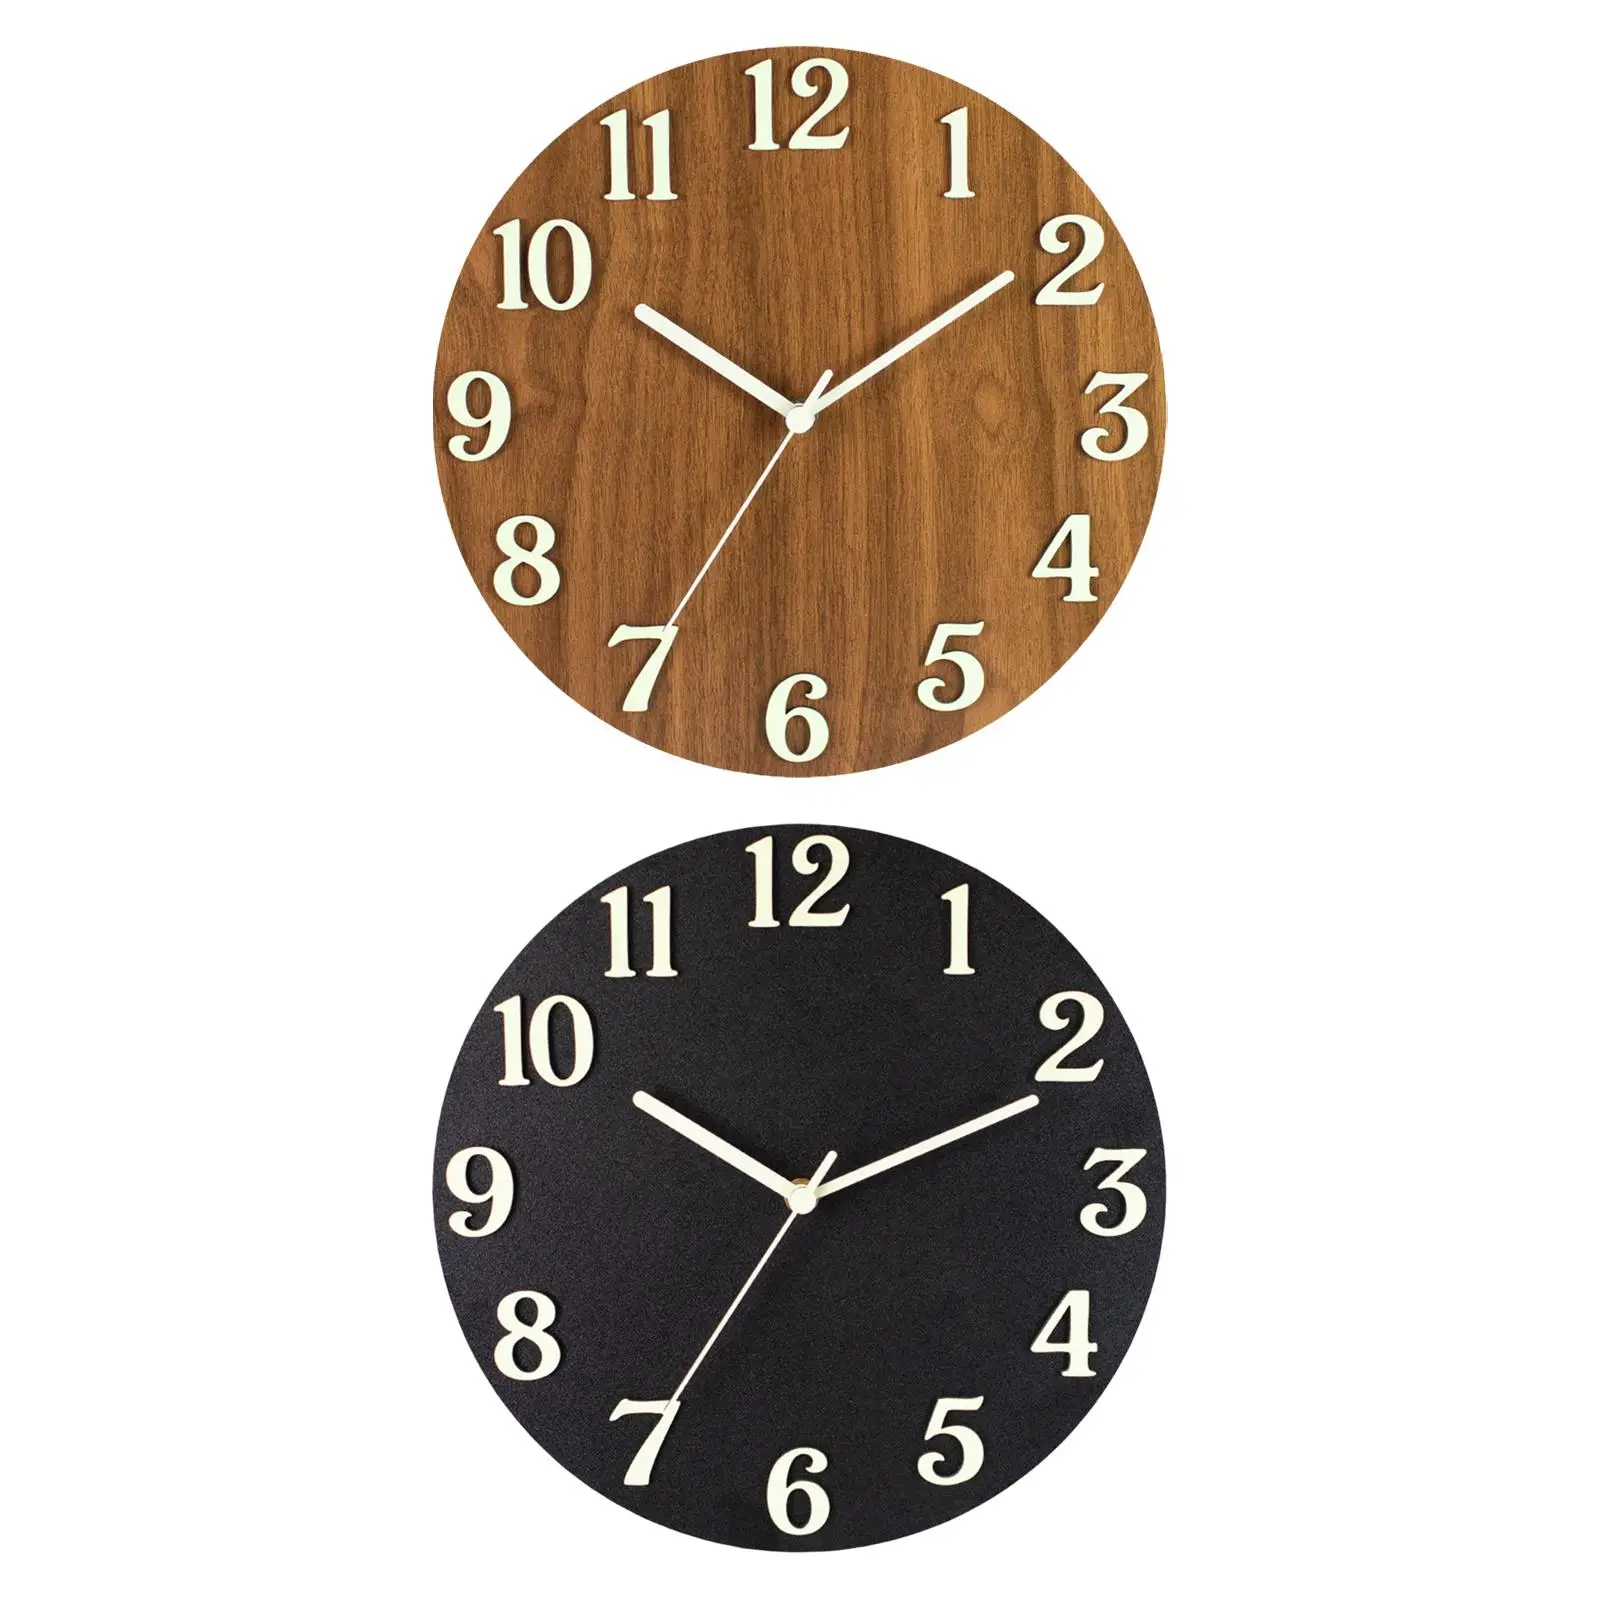 12 Inch Illuminated Wall Clock Wooden Wall Clock Silent Light in The Dark with